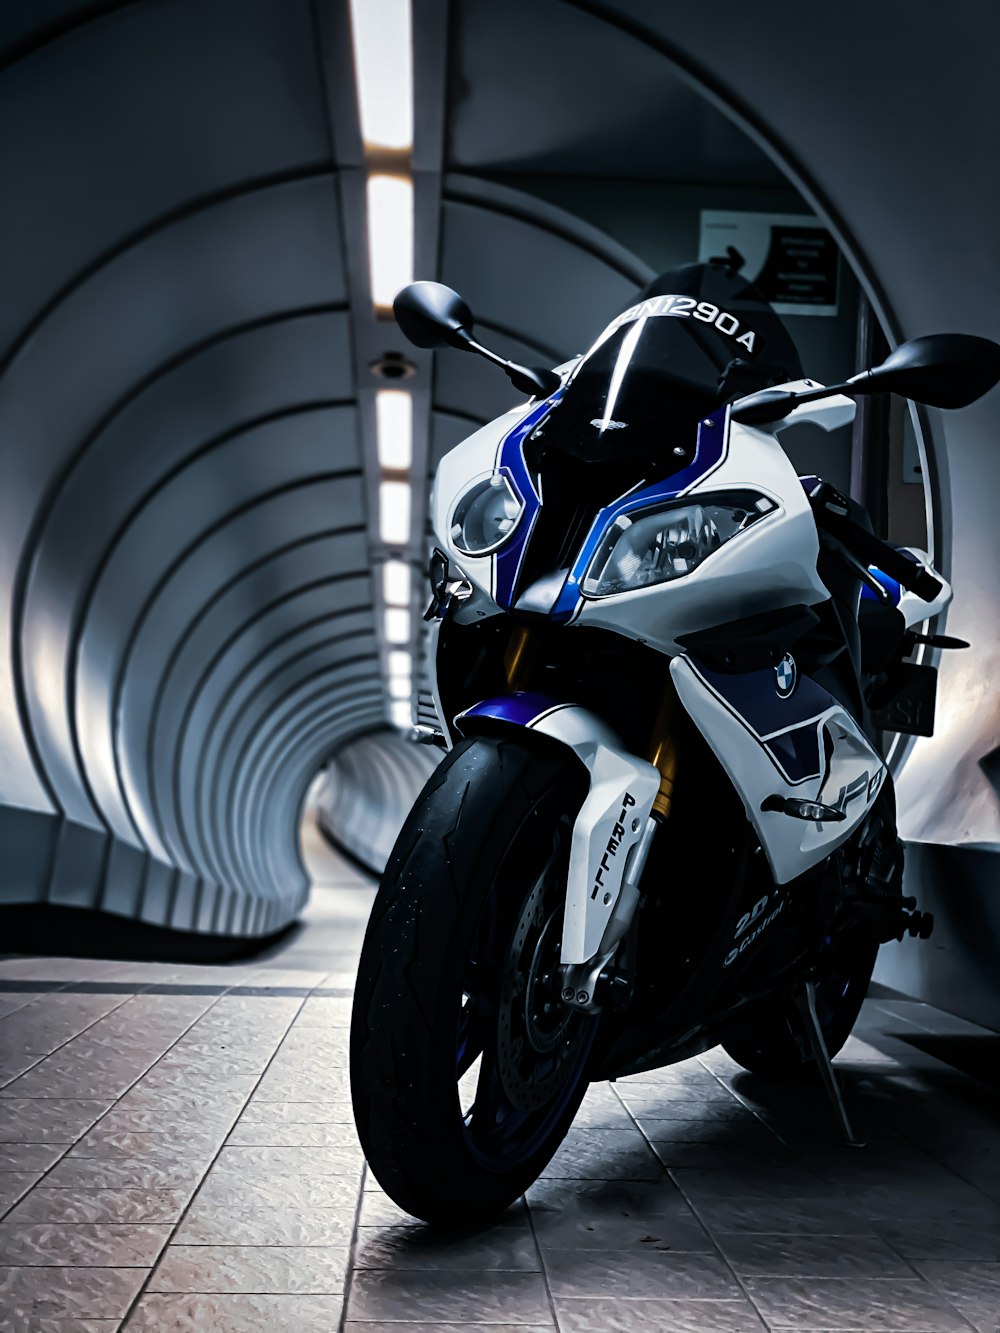 Bmw S1000rr Pictures  Download Free Images on Unsplash